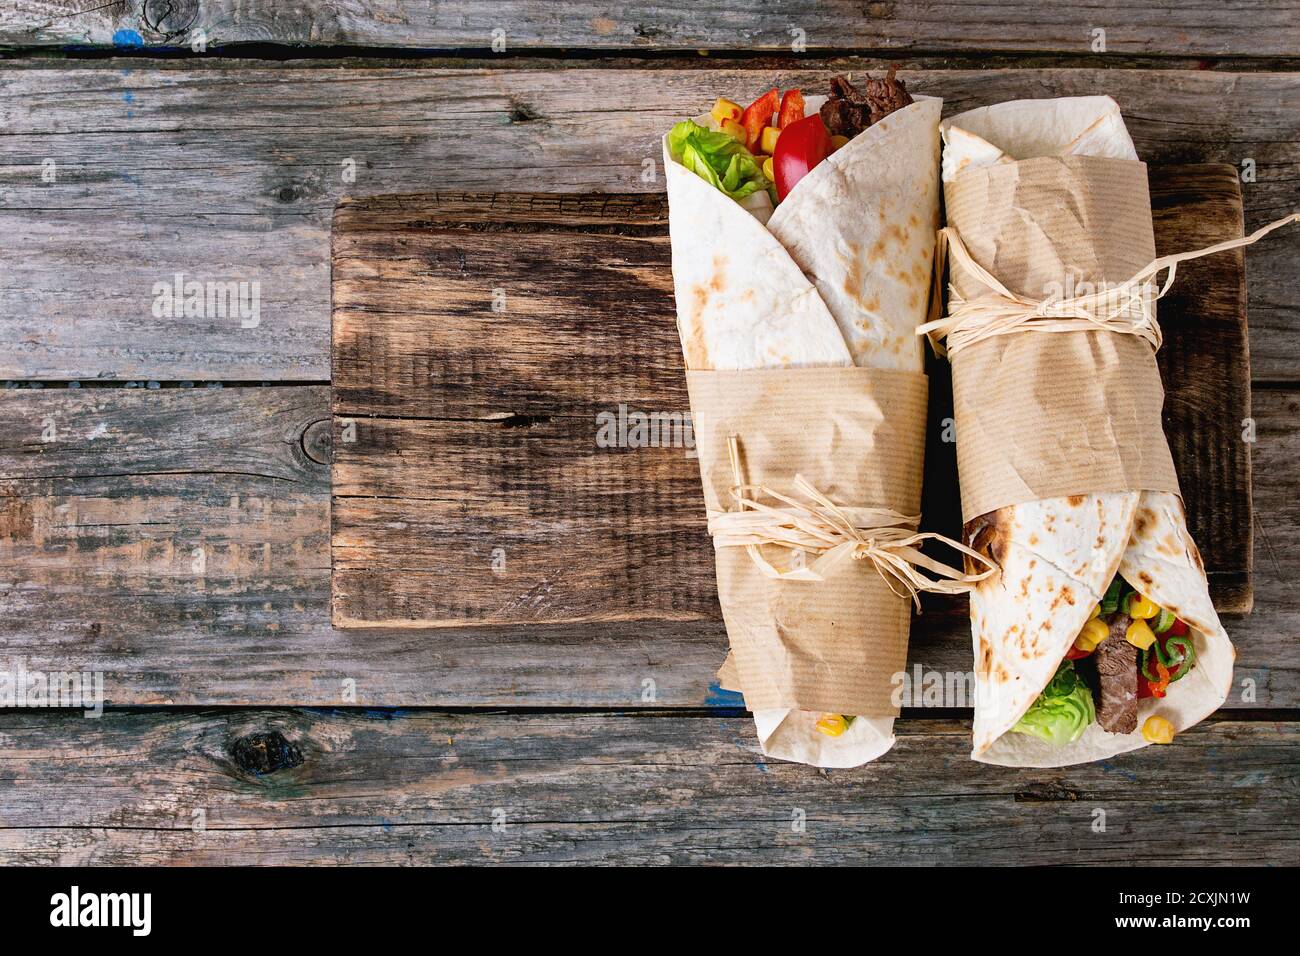 Mexican style dinner. Two papered tortillas burrito with beef and vegetables over old wooden background. Flat lay. With copy space Stock Photo